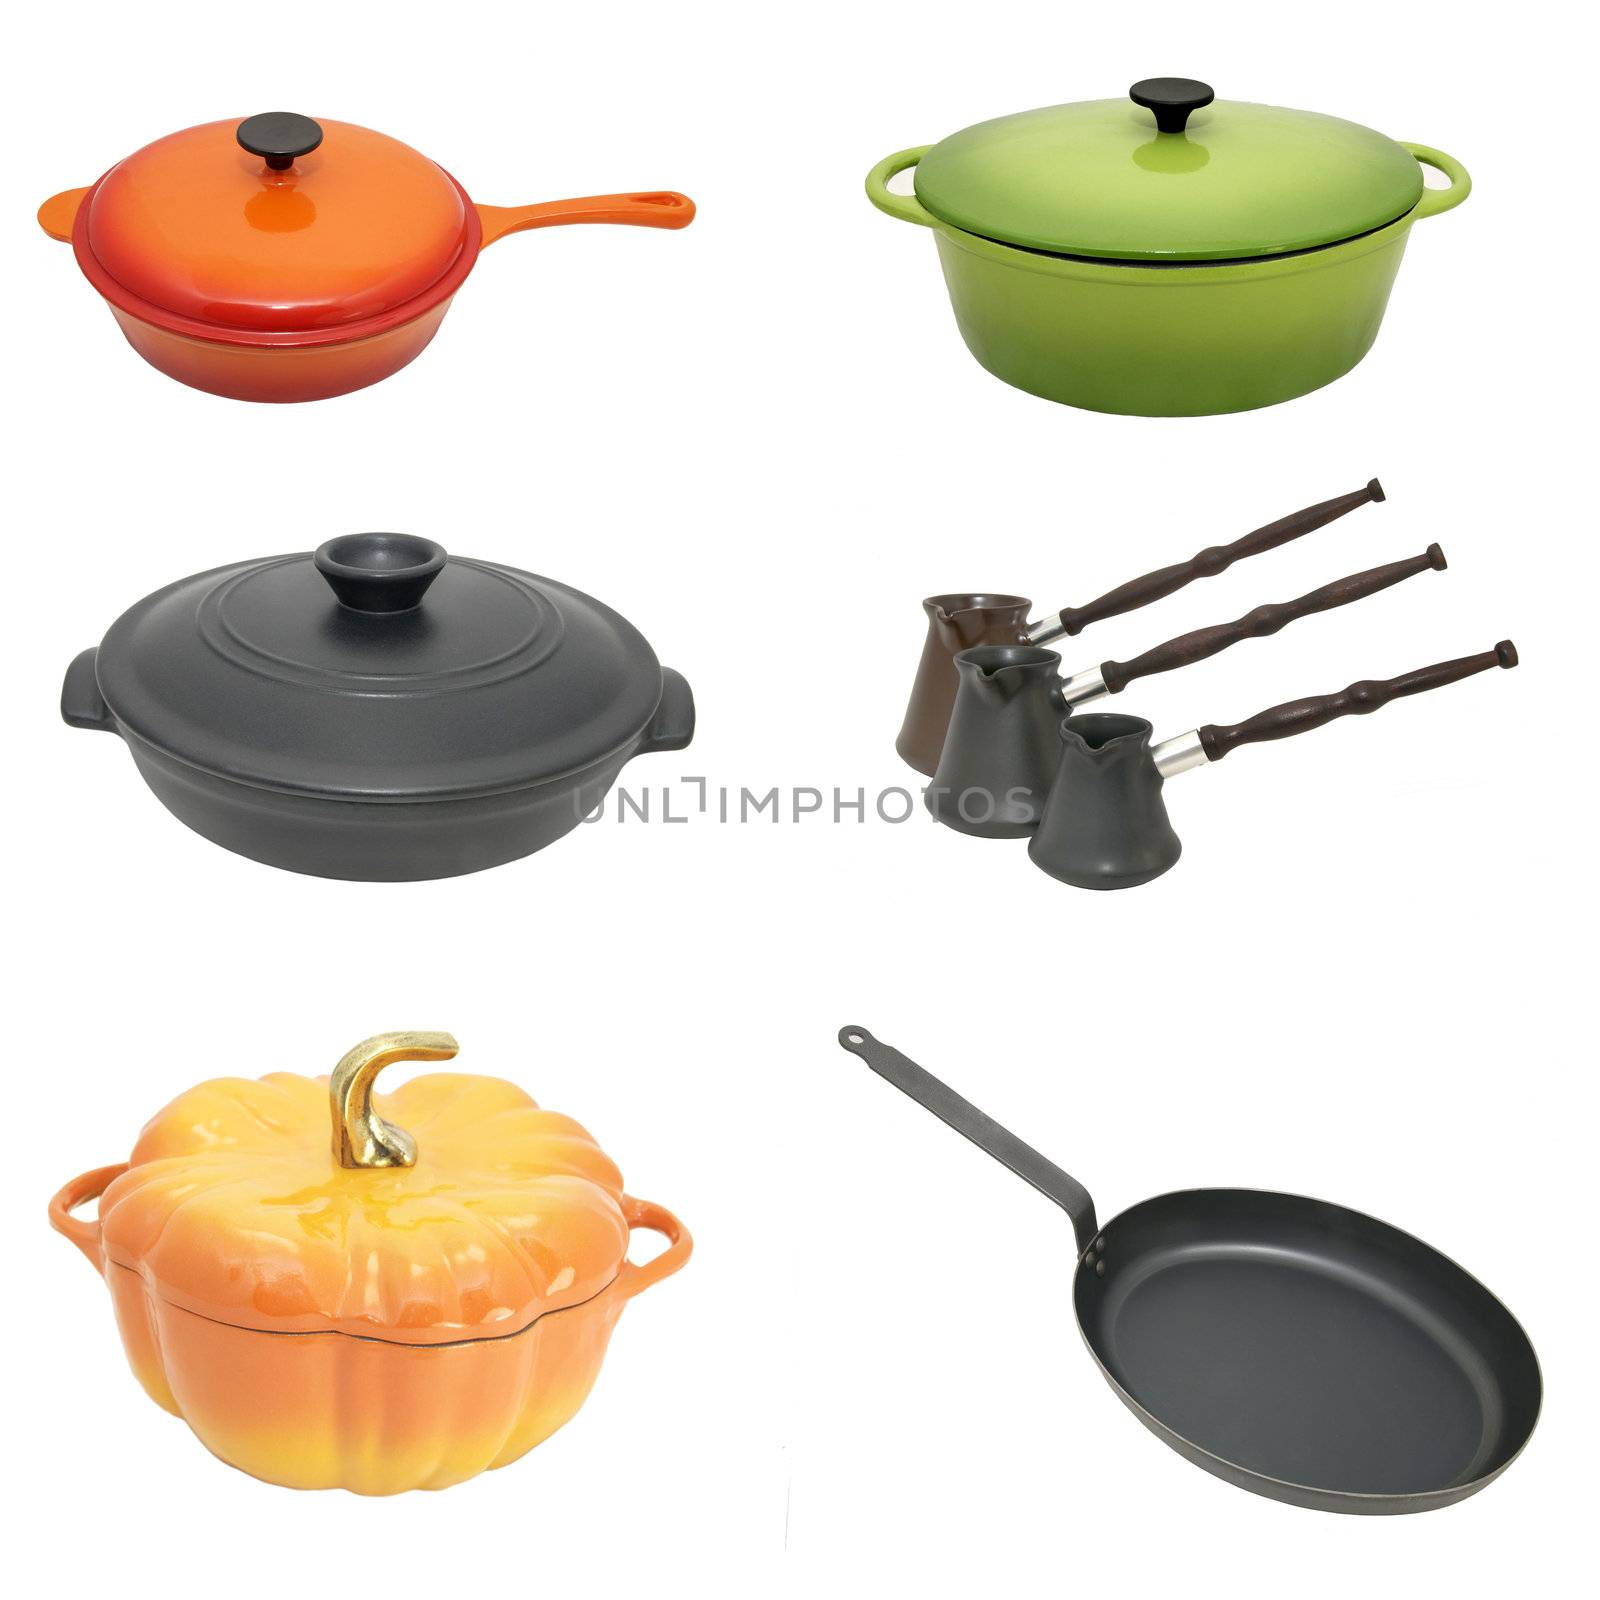 kitchenware by Lester120